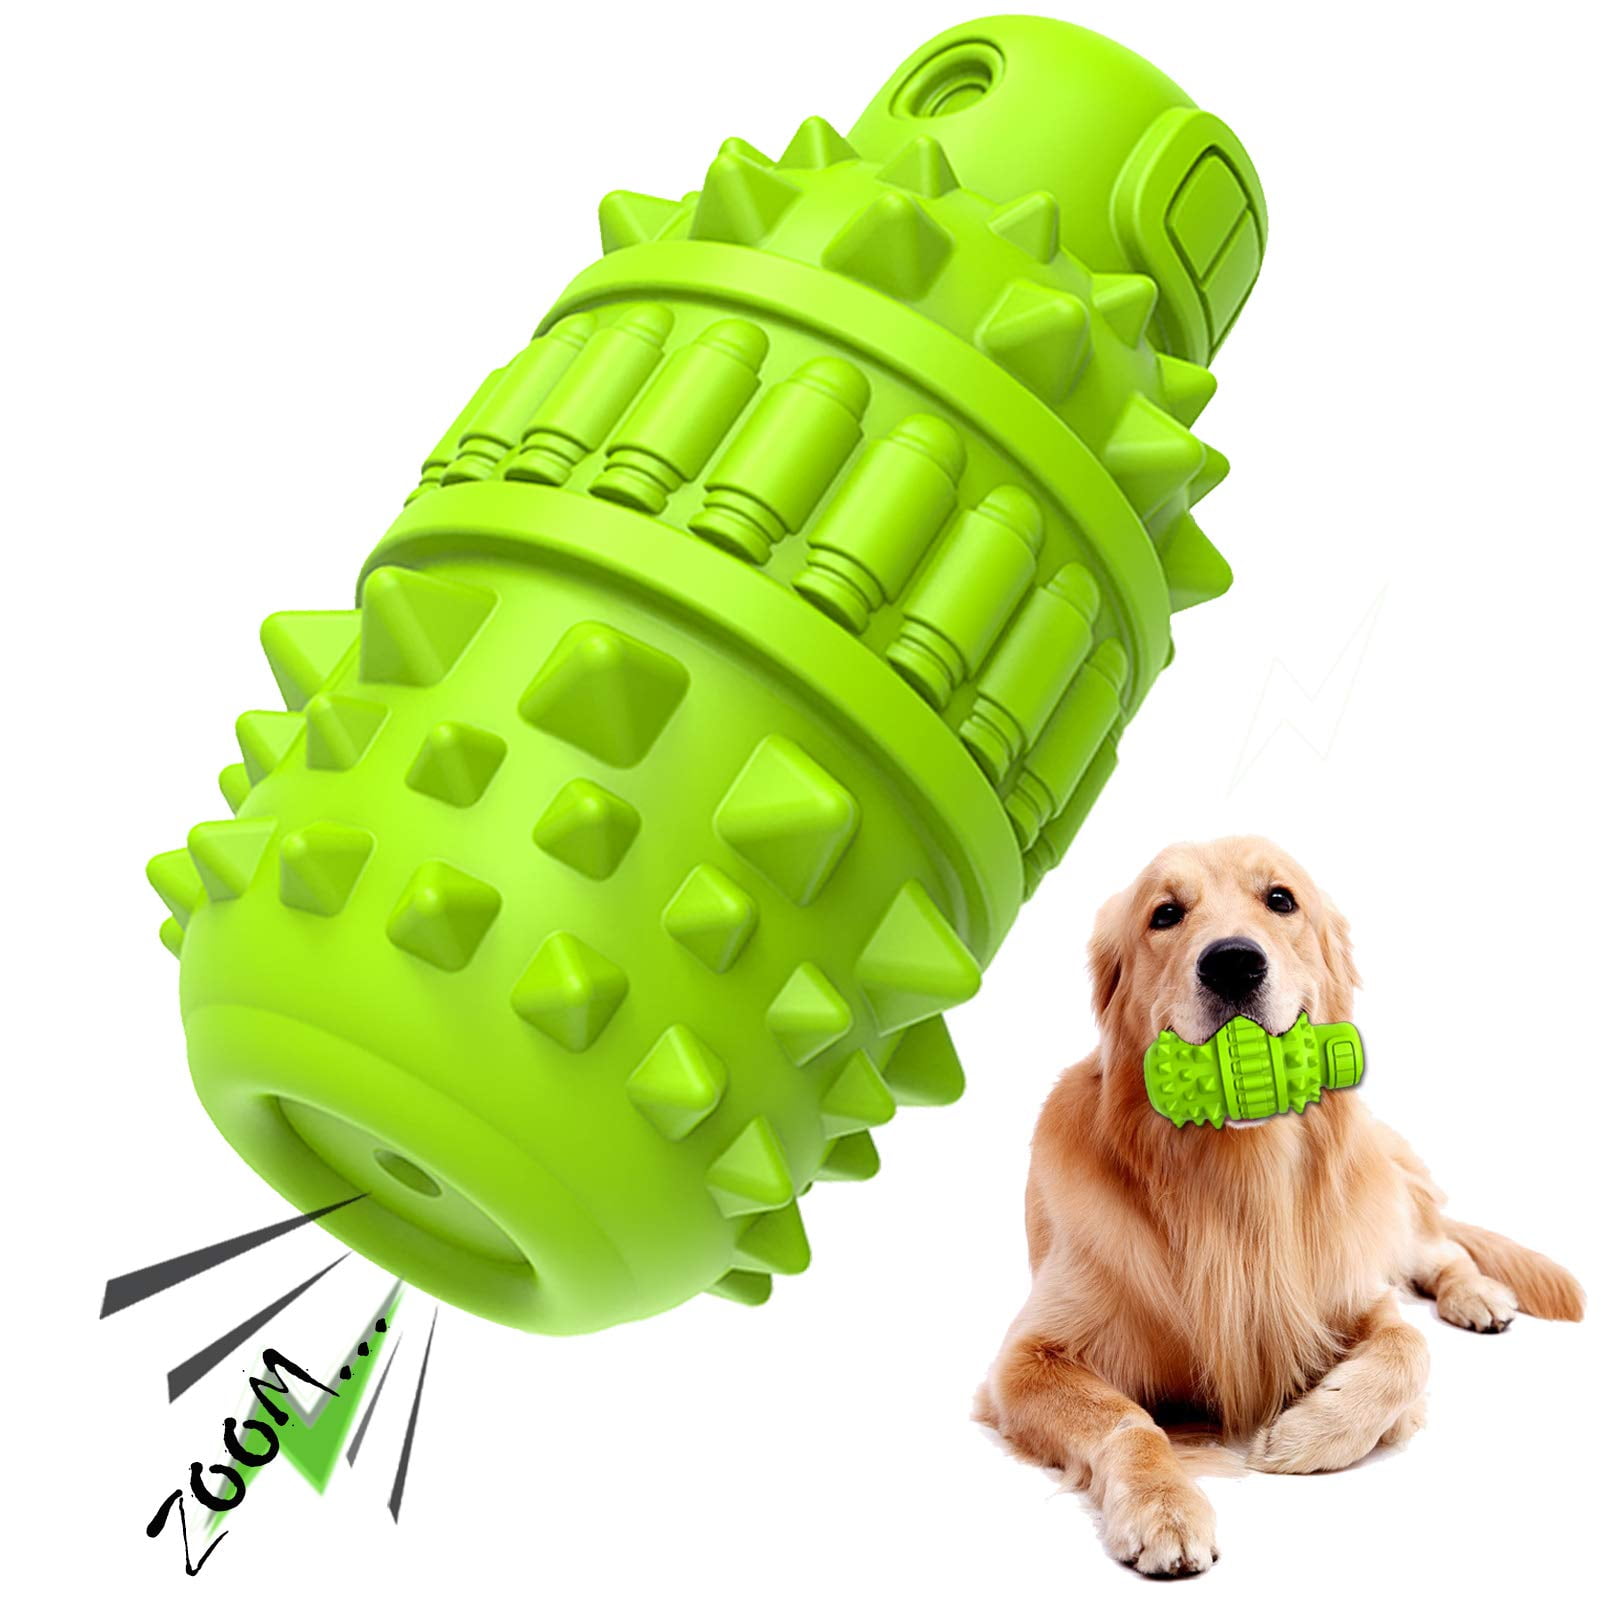 Flourish FBA Pets Dog Chew Toy with Non-Toxic BPA, Double Stitched Soft Fabric Exterior Squeaky Indestructible Dog Toy for Aggressive Chewers (Large